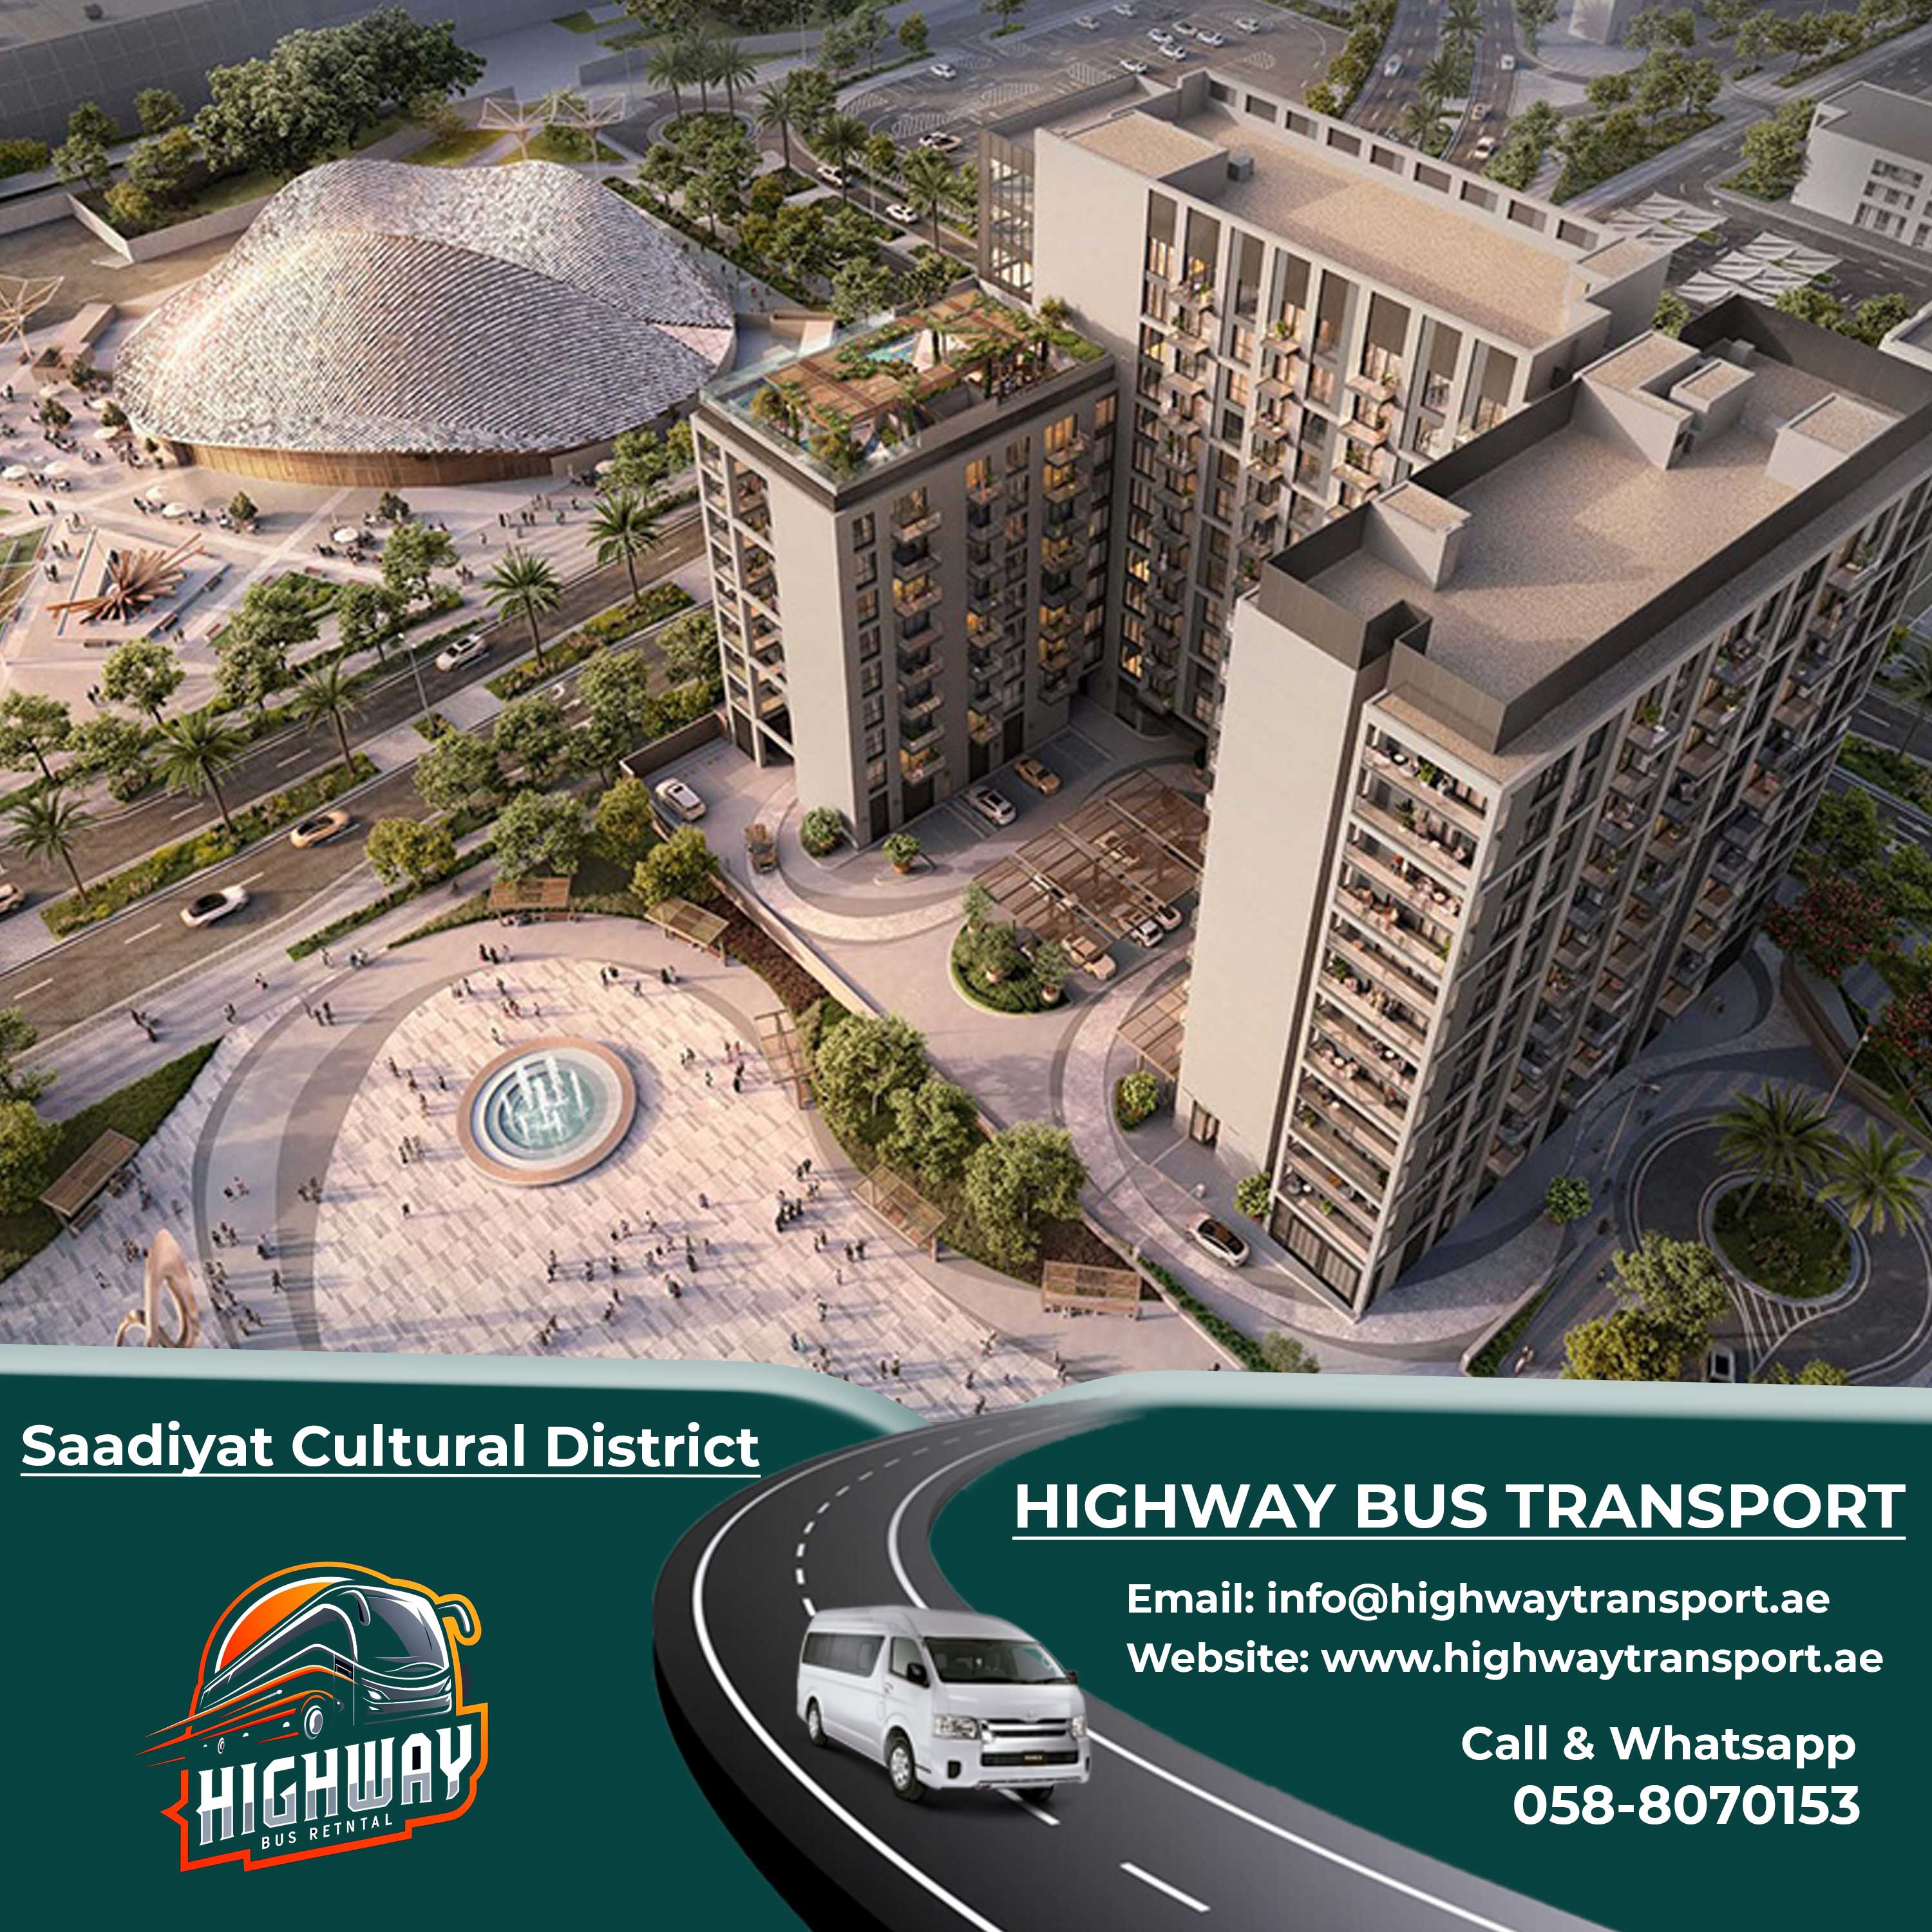 Saadiyat Cultural District showcasing museums, exhibitions, events, and development plans